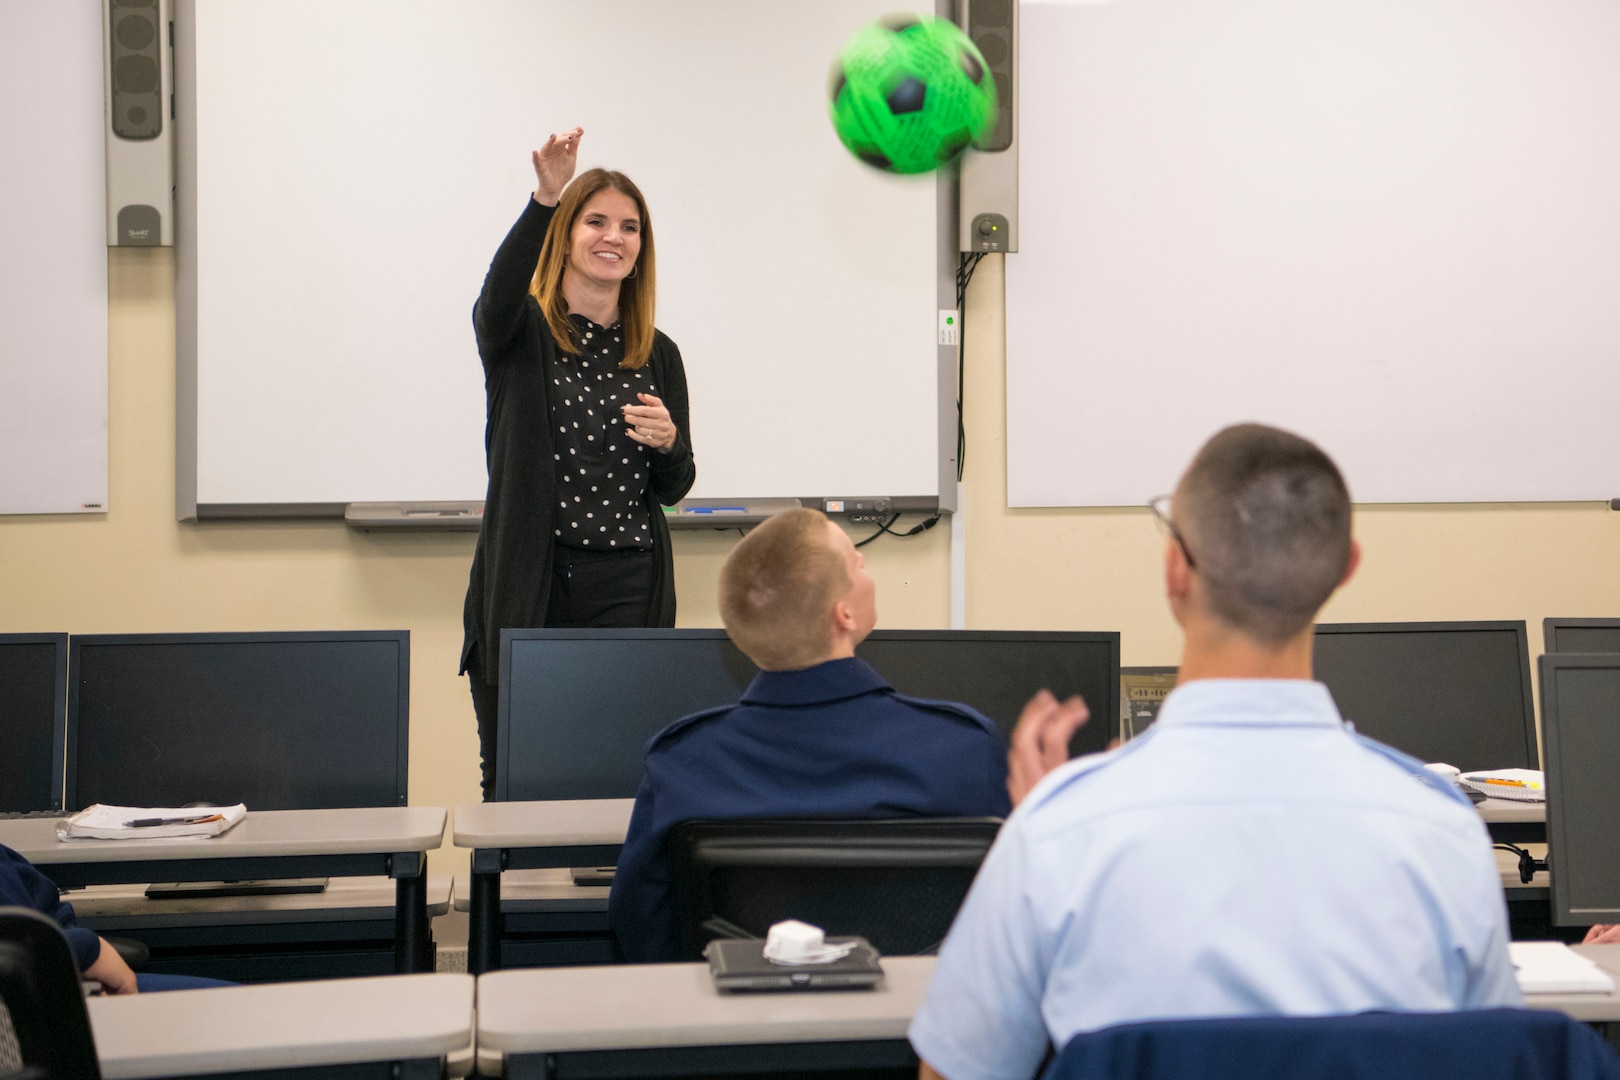 Dr. Julie Landry uses a soccer ball as an ice breaker during a new student briefing at JBSA-Randolph. Landry is the first psychologist to work at the 558th Flying Training Squadron at Randolph.